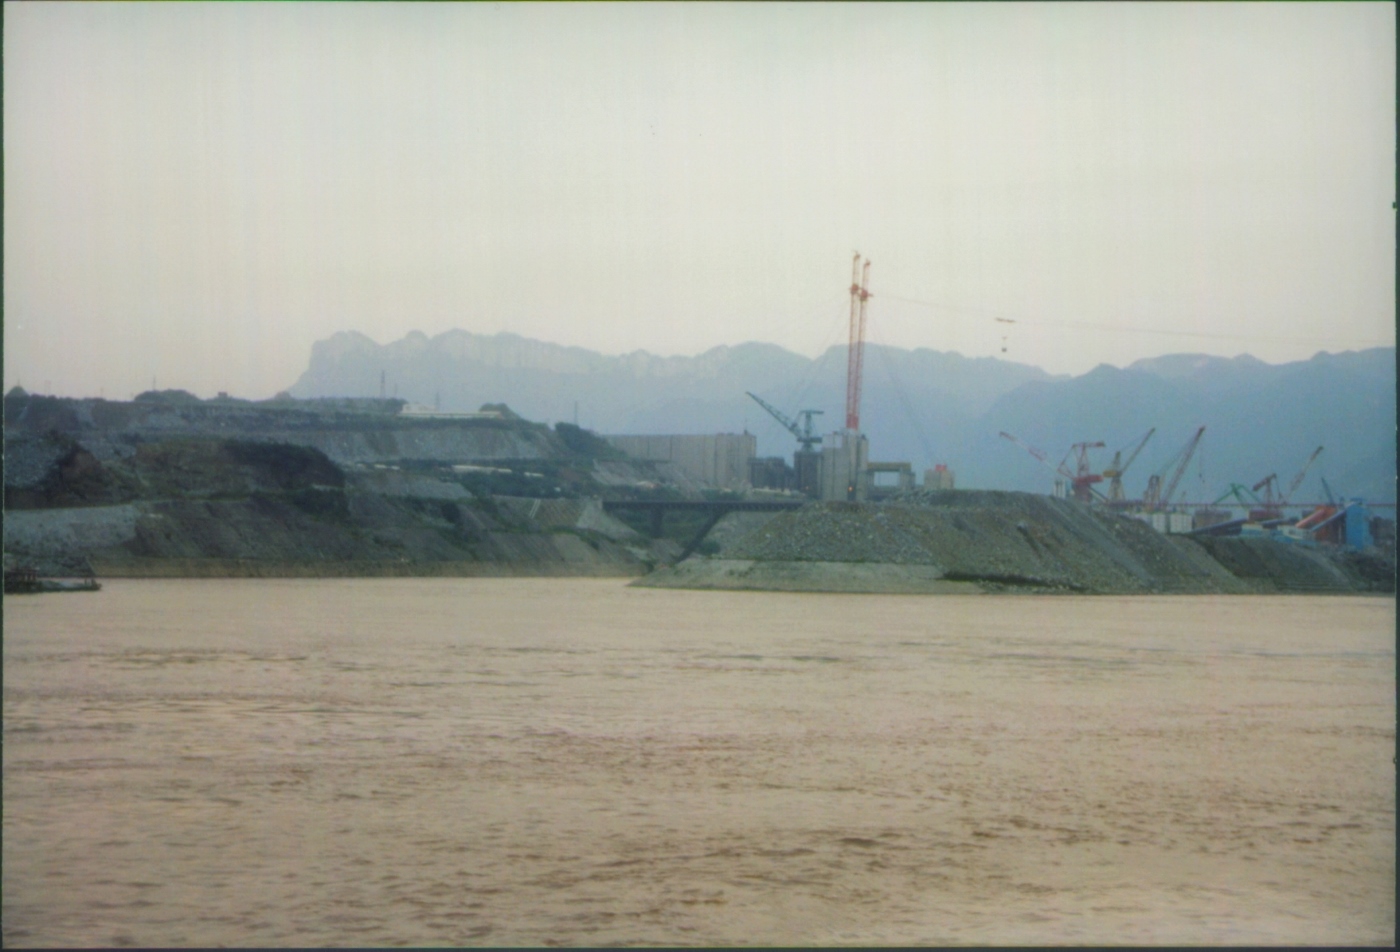 three gorges dam china under construction in 1999